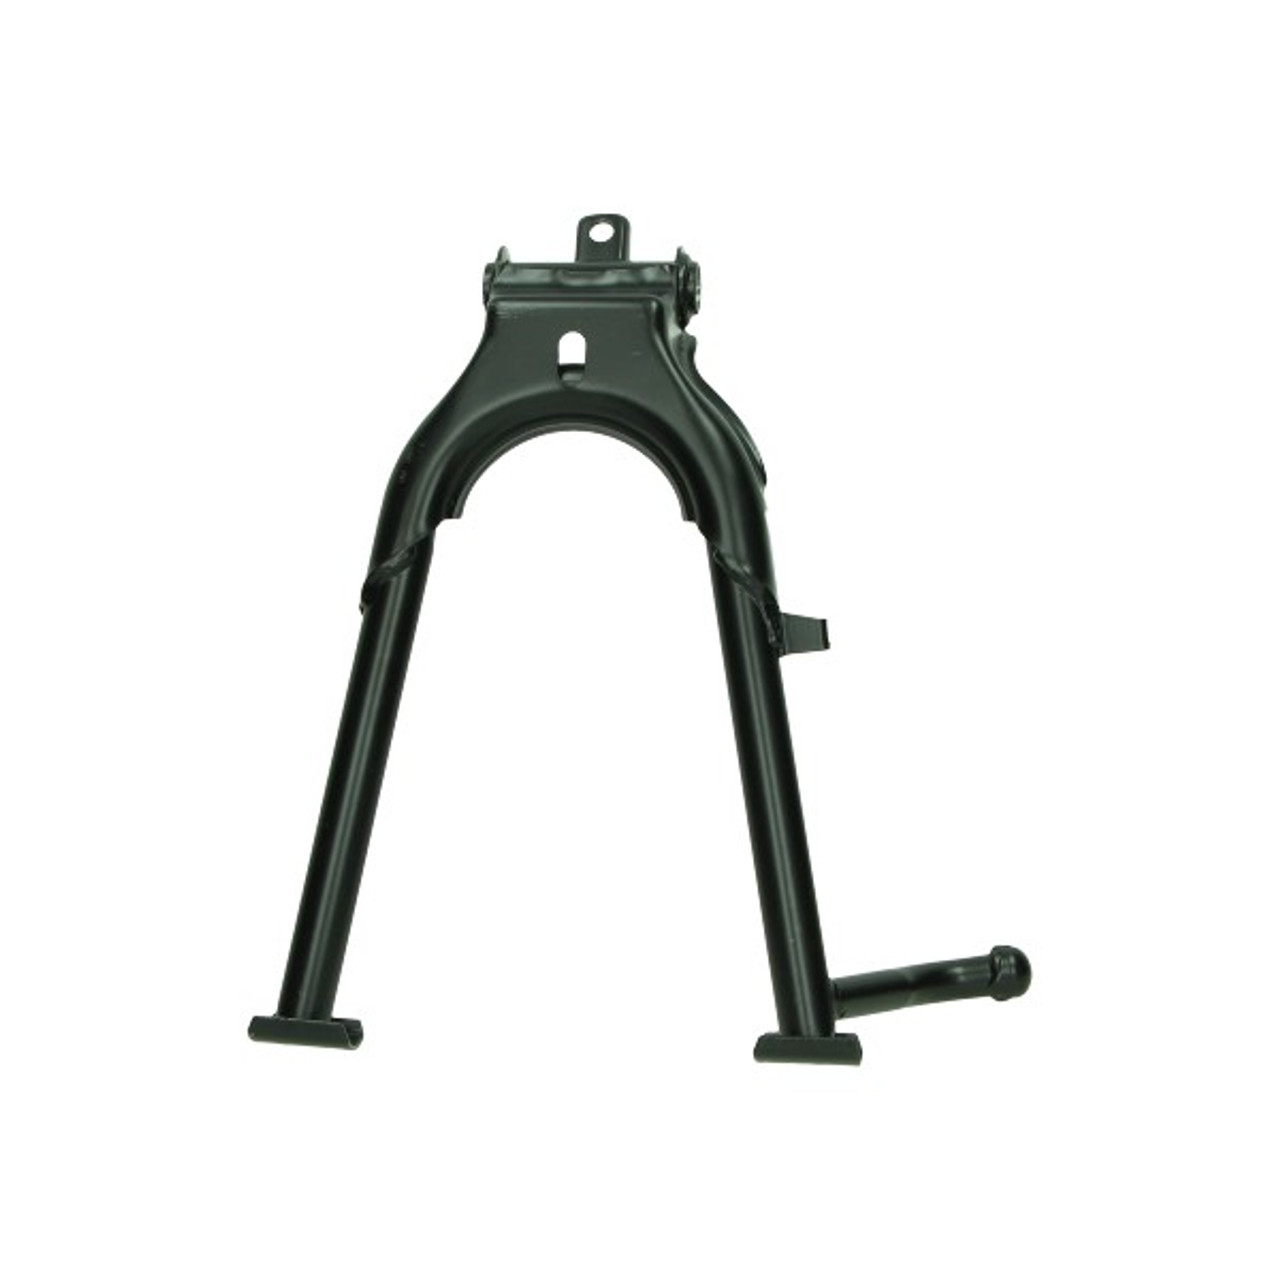  Honda MB5 Replacement Center Stand